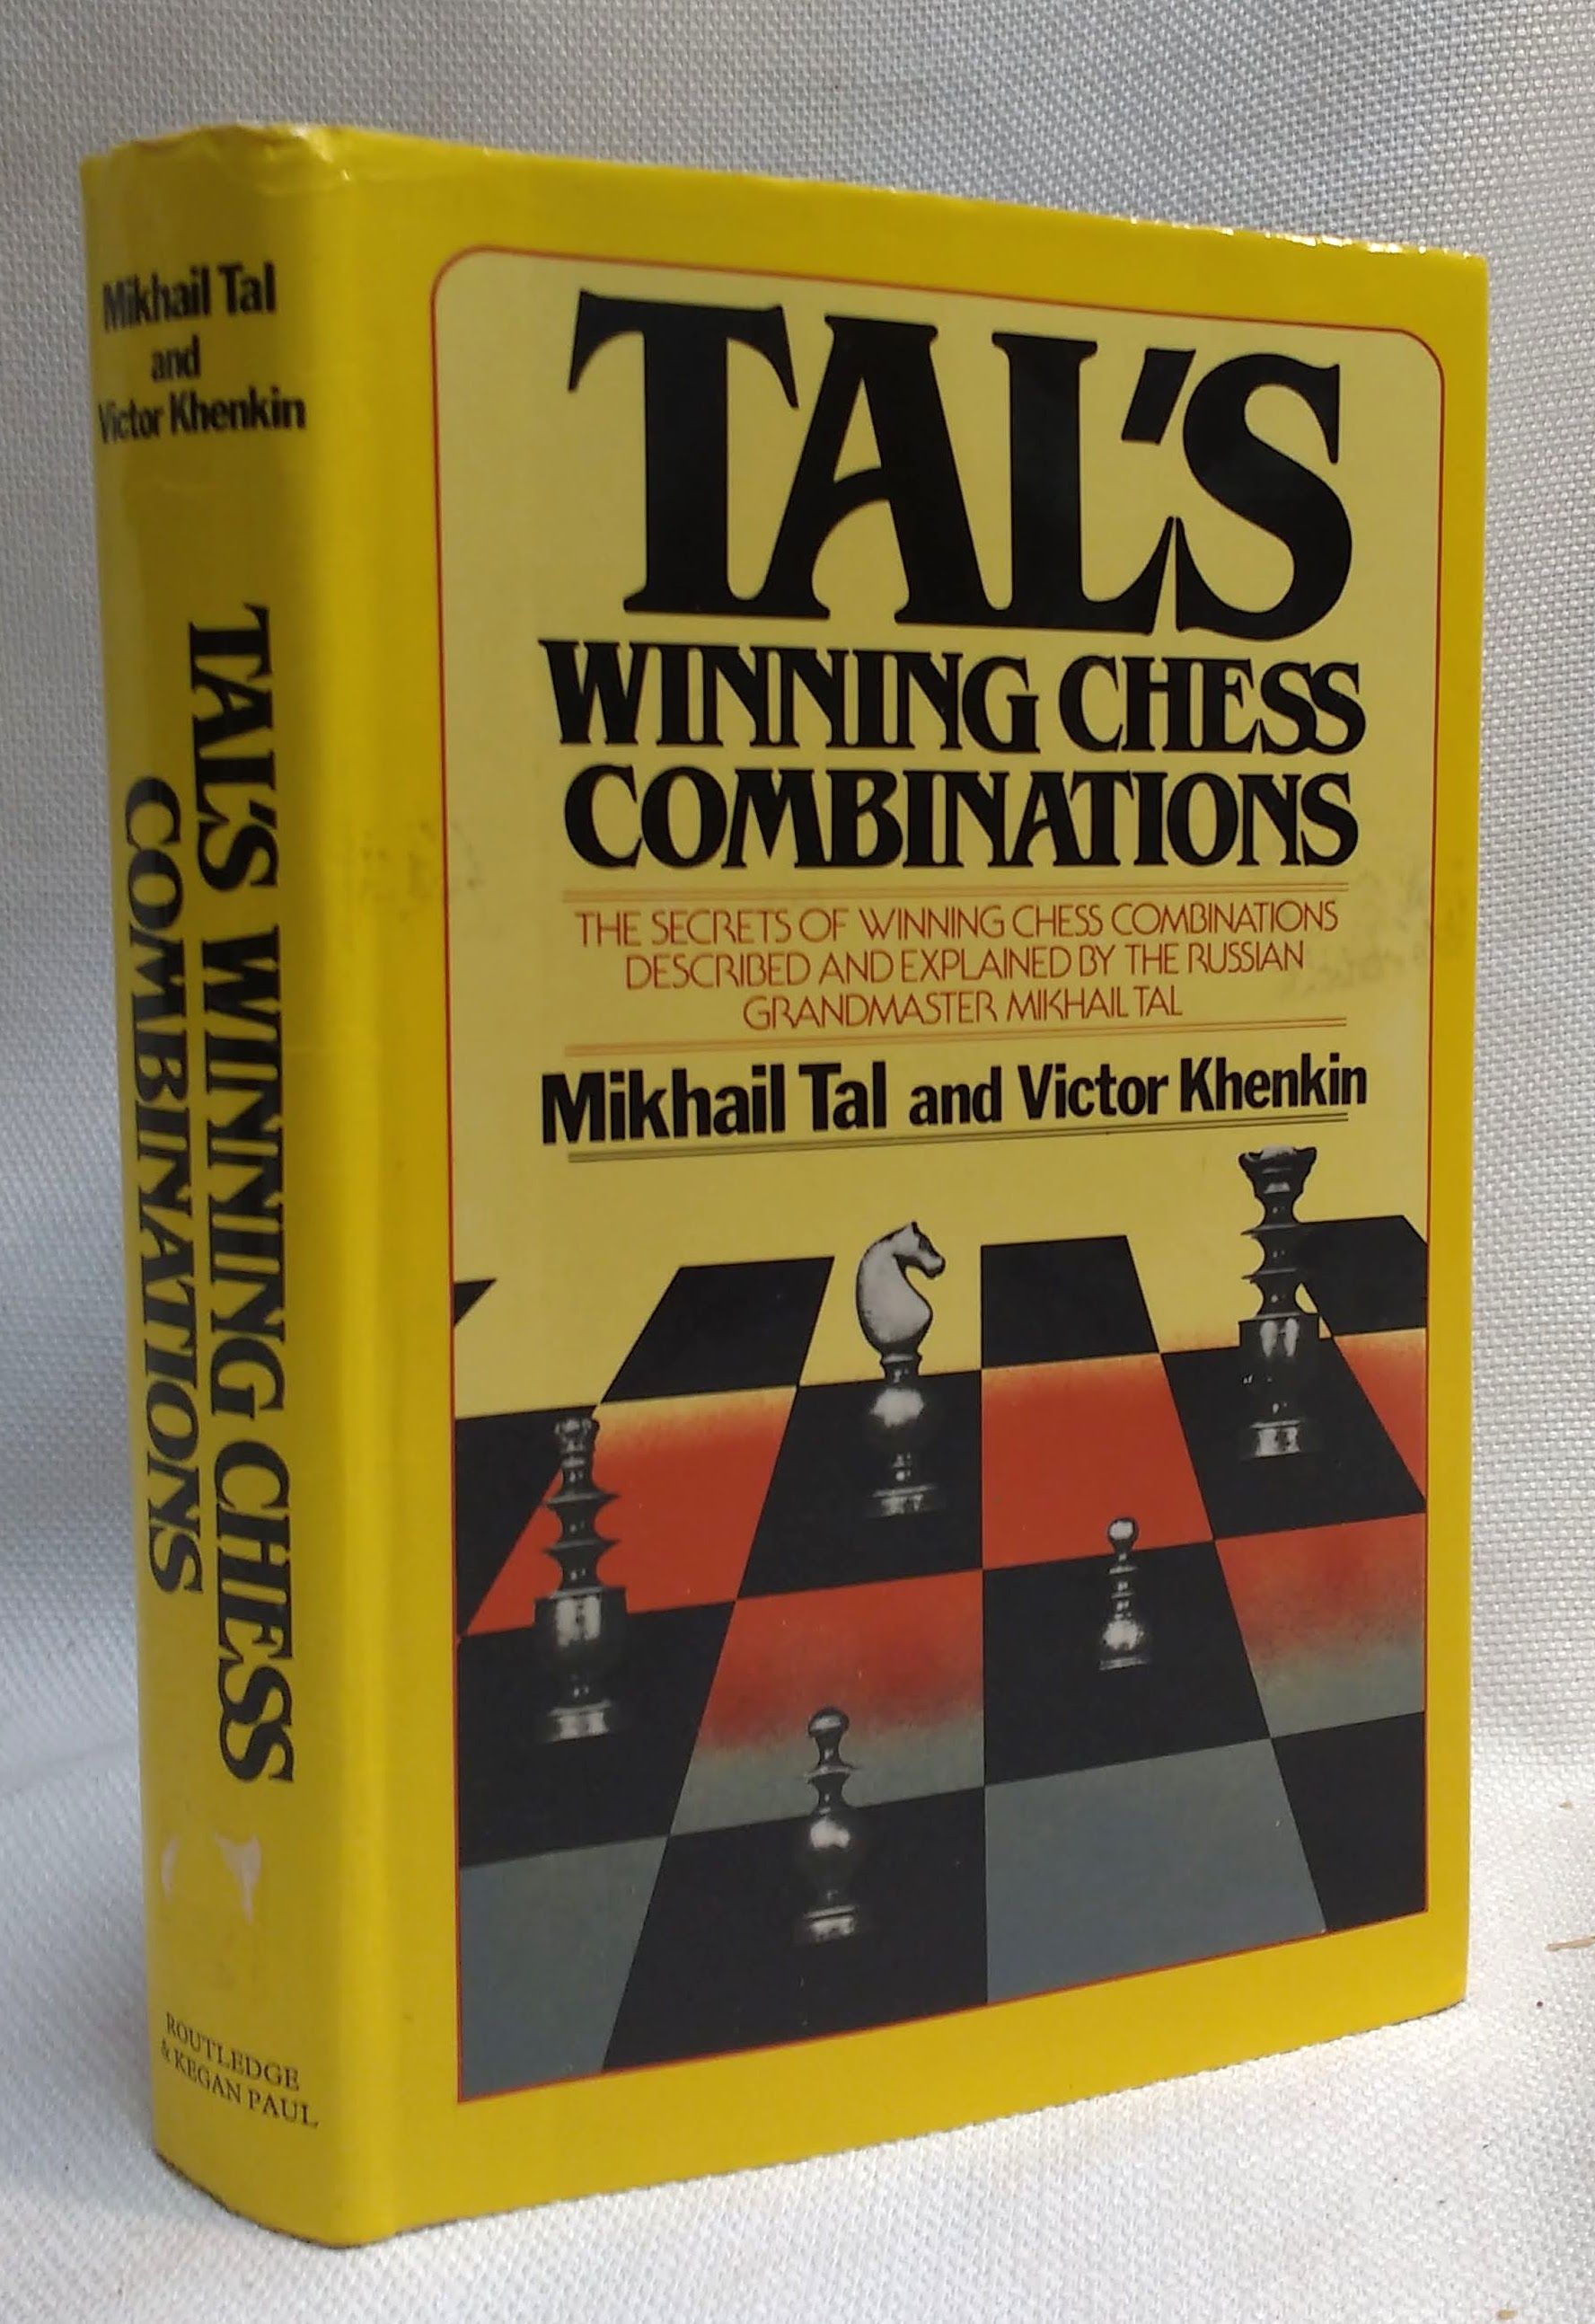 The Life and Games of Mikhail Tal – Everyman Chess